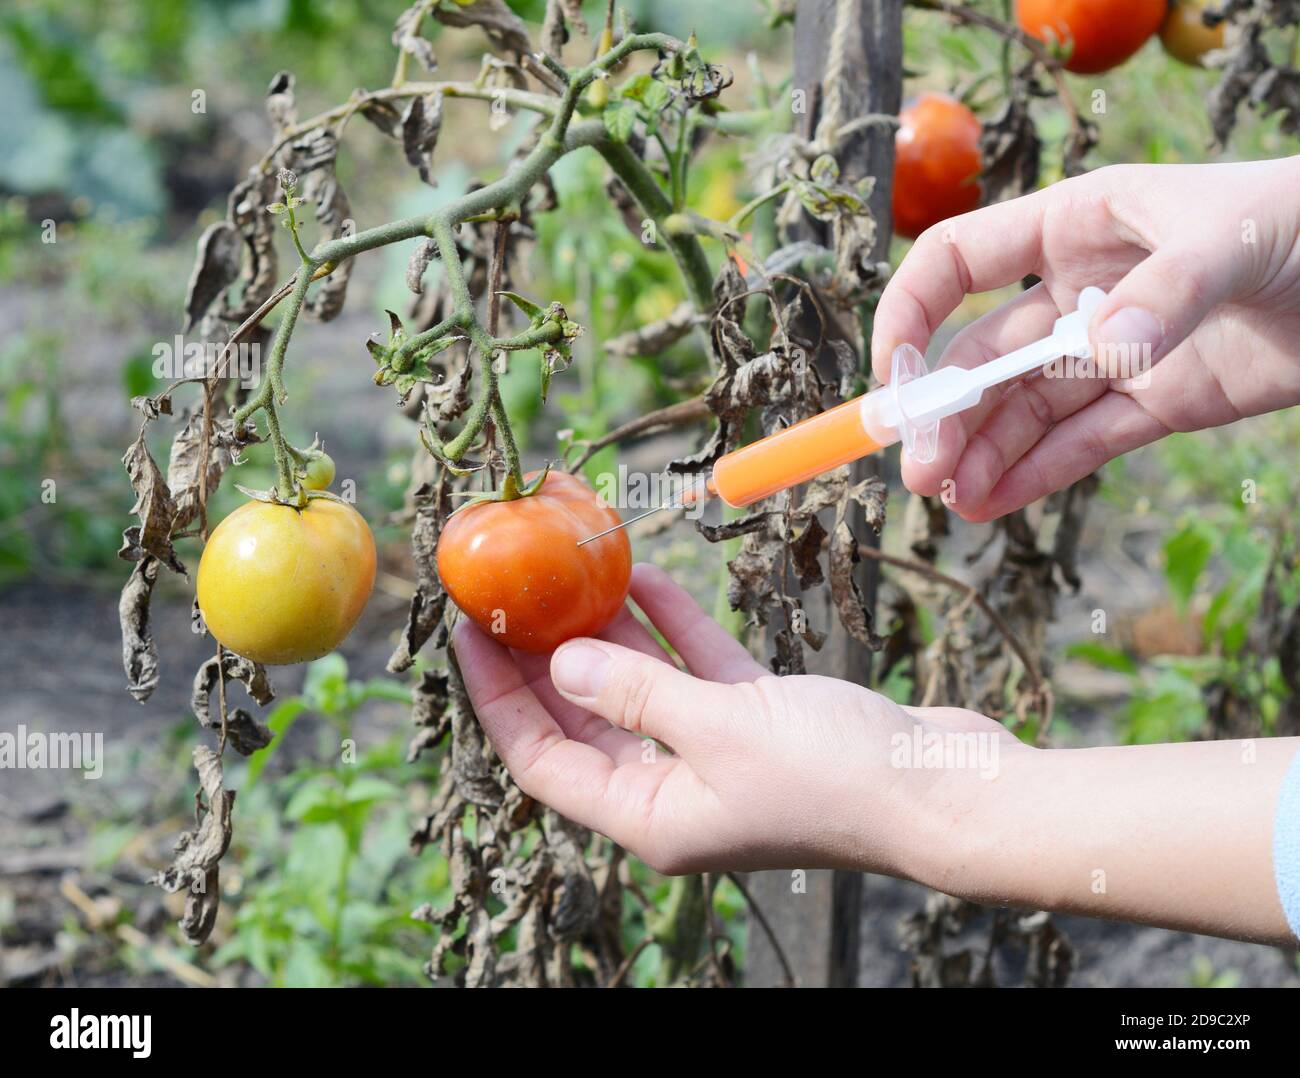 A woman is making an injection to a tomato as a symbol of tomato plant disease treatment from late blight or fusarium and verticillium wilt. Stock Photo